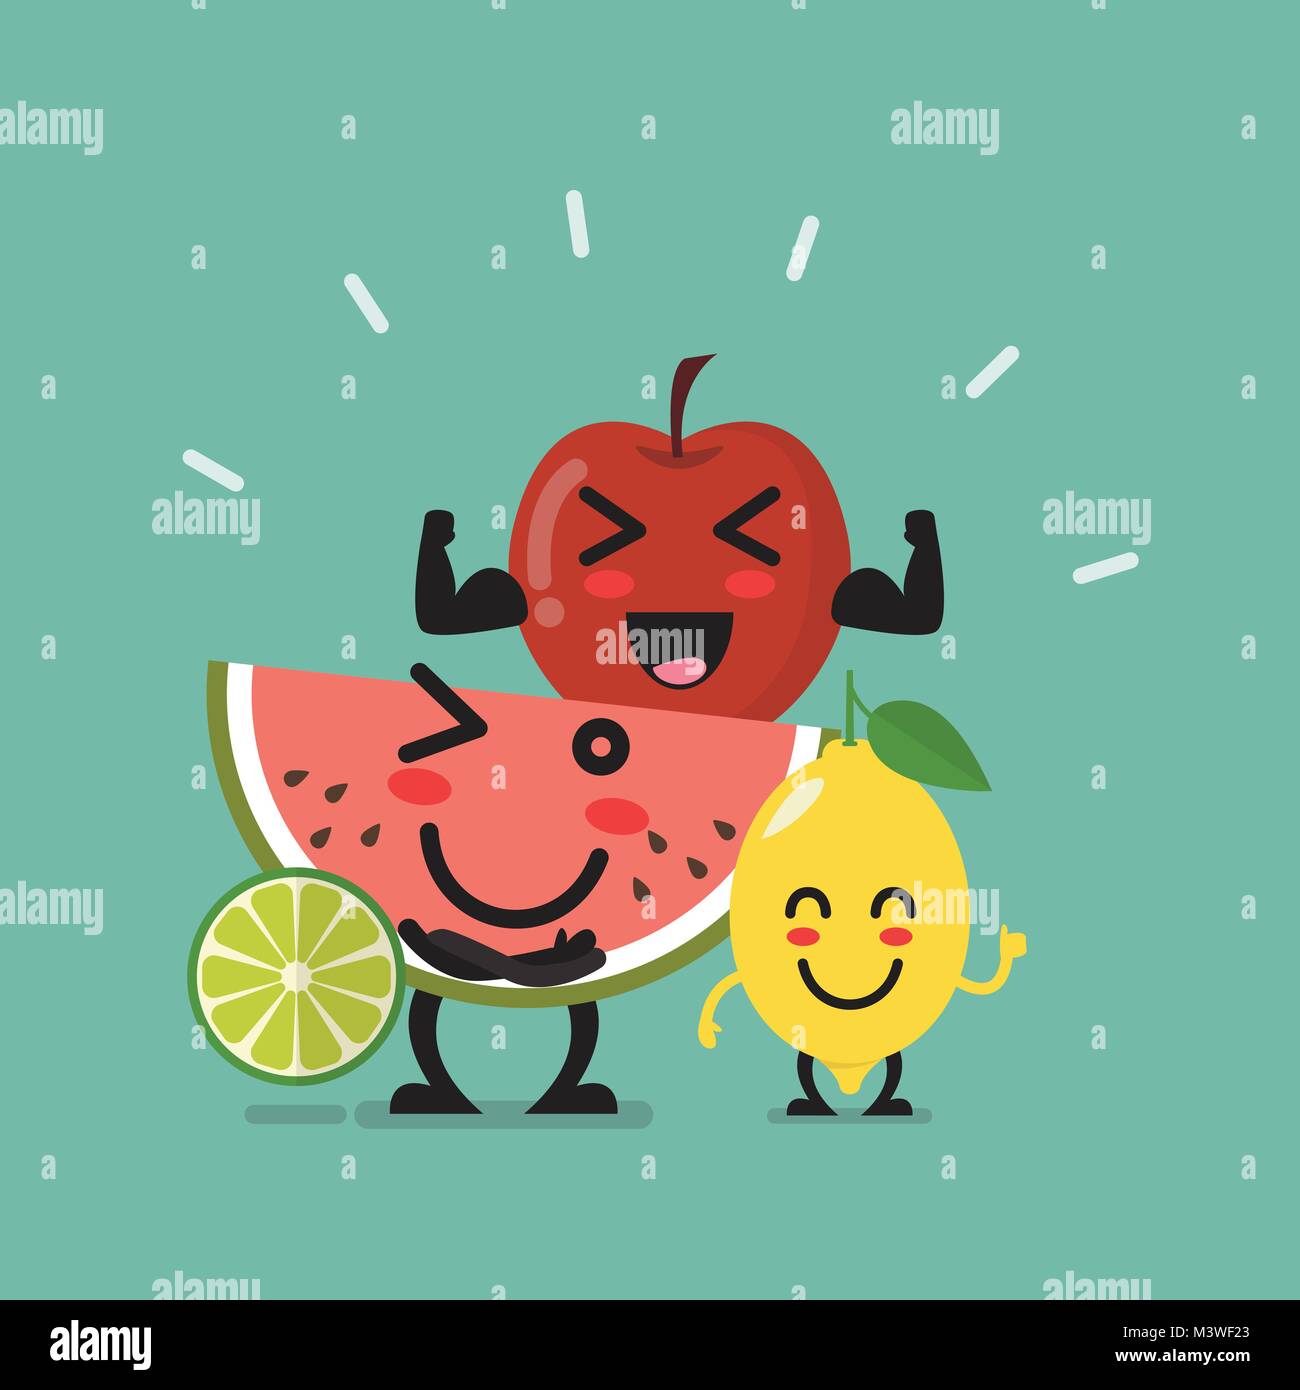 Healthy food emoji characters. healthy lifestyle concept Stock Vector